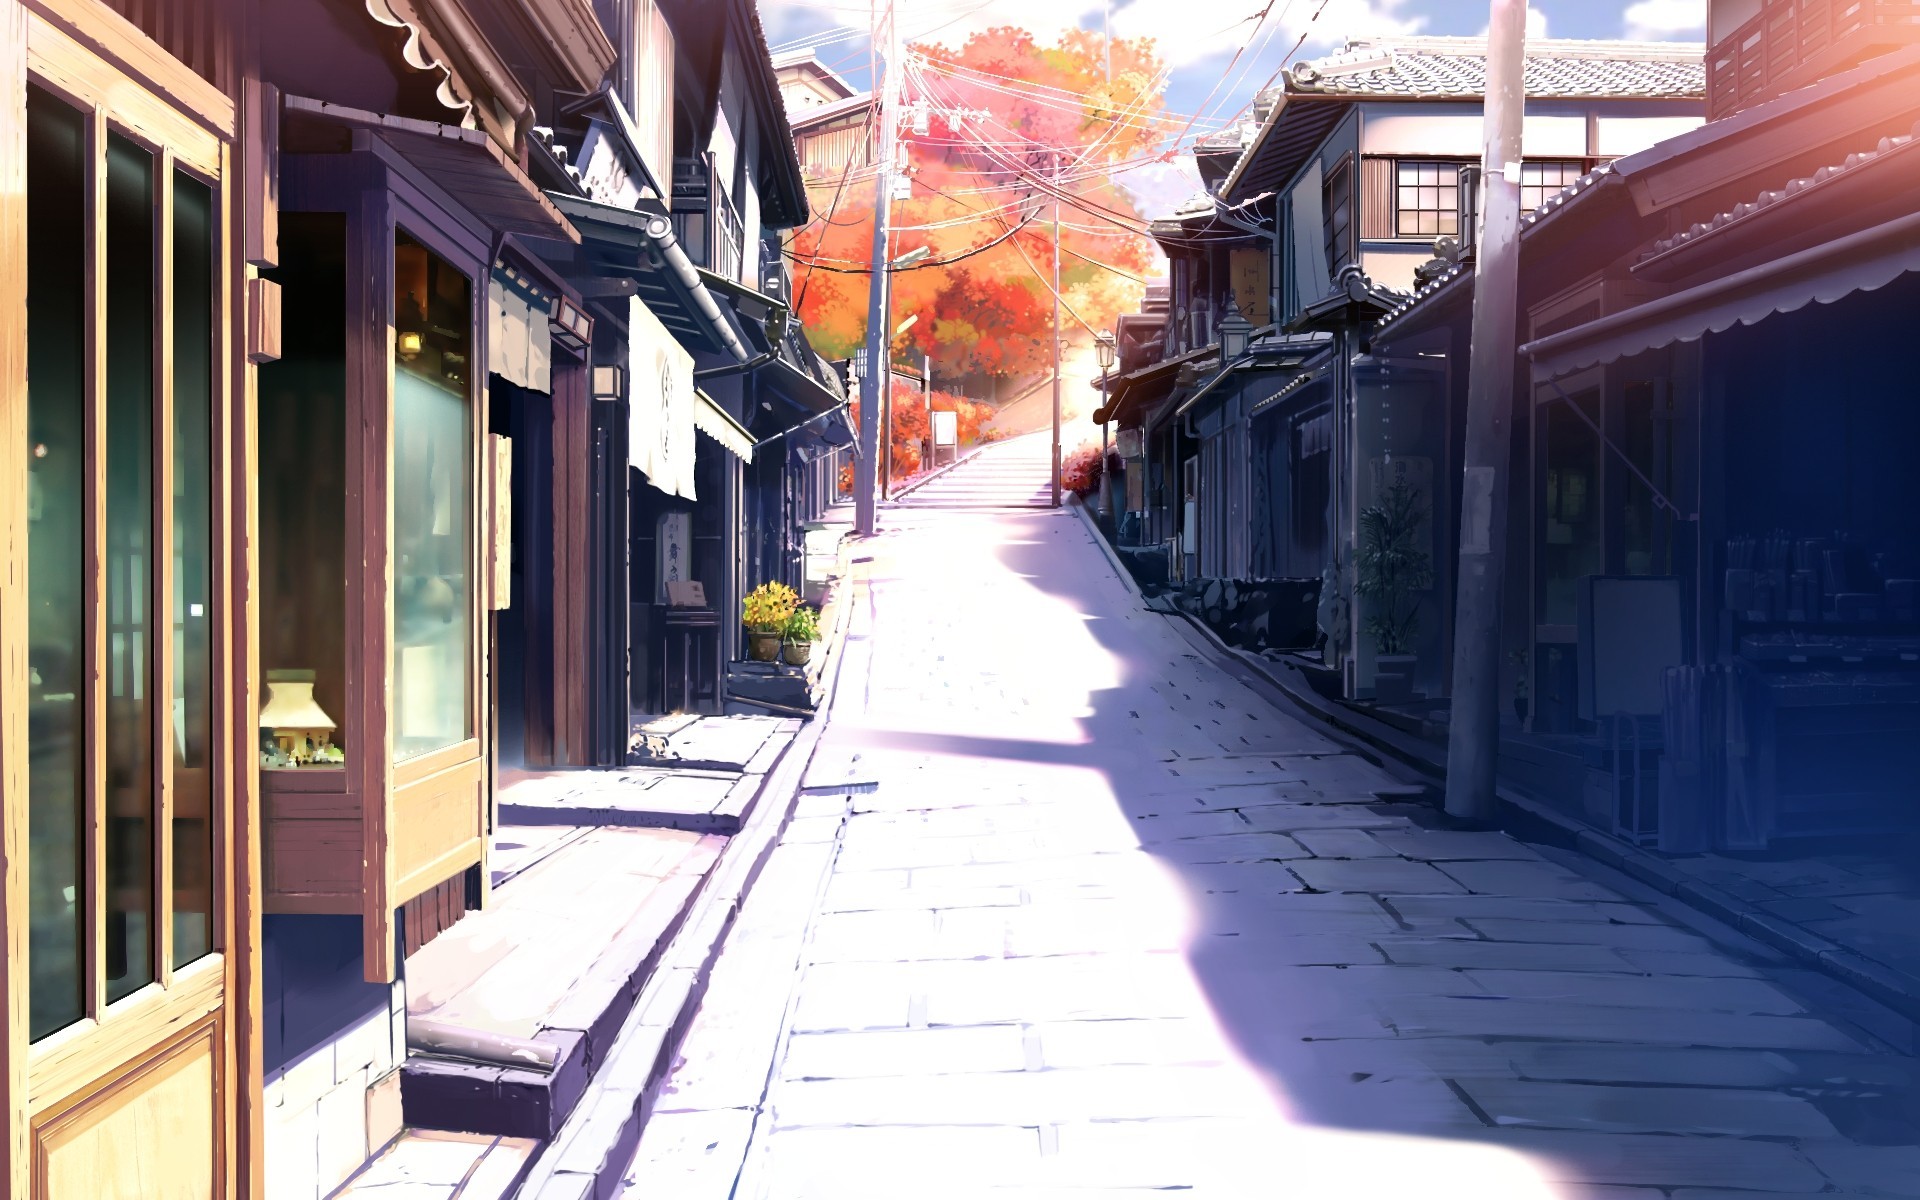 Wallpaper, landscape, drawing, fall, city, street, architecture, anime, vehicle, road, transport, infrastructure, color, alley, lane, urban area, neighbourhood, residential area 1920x1200